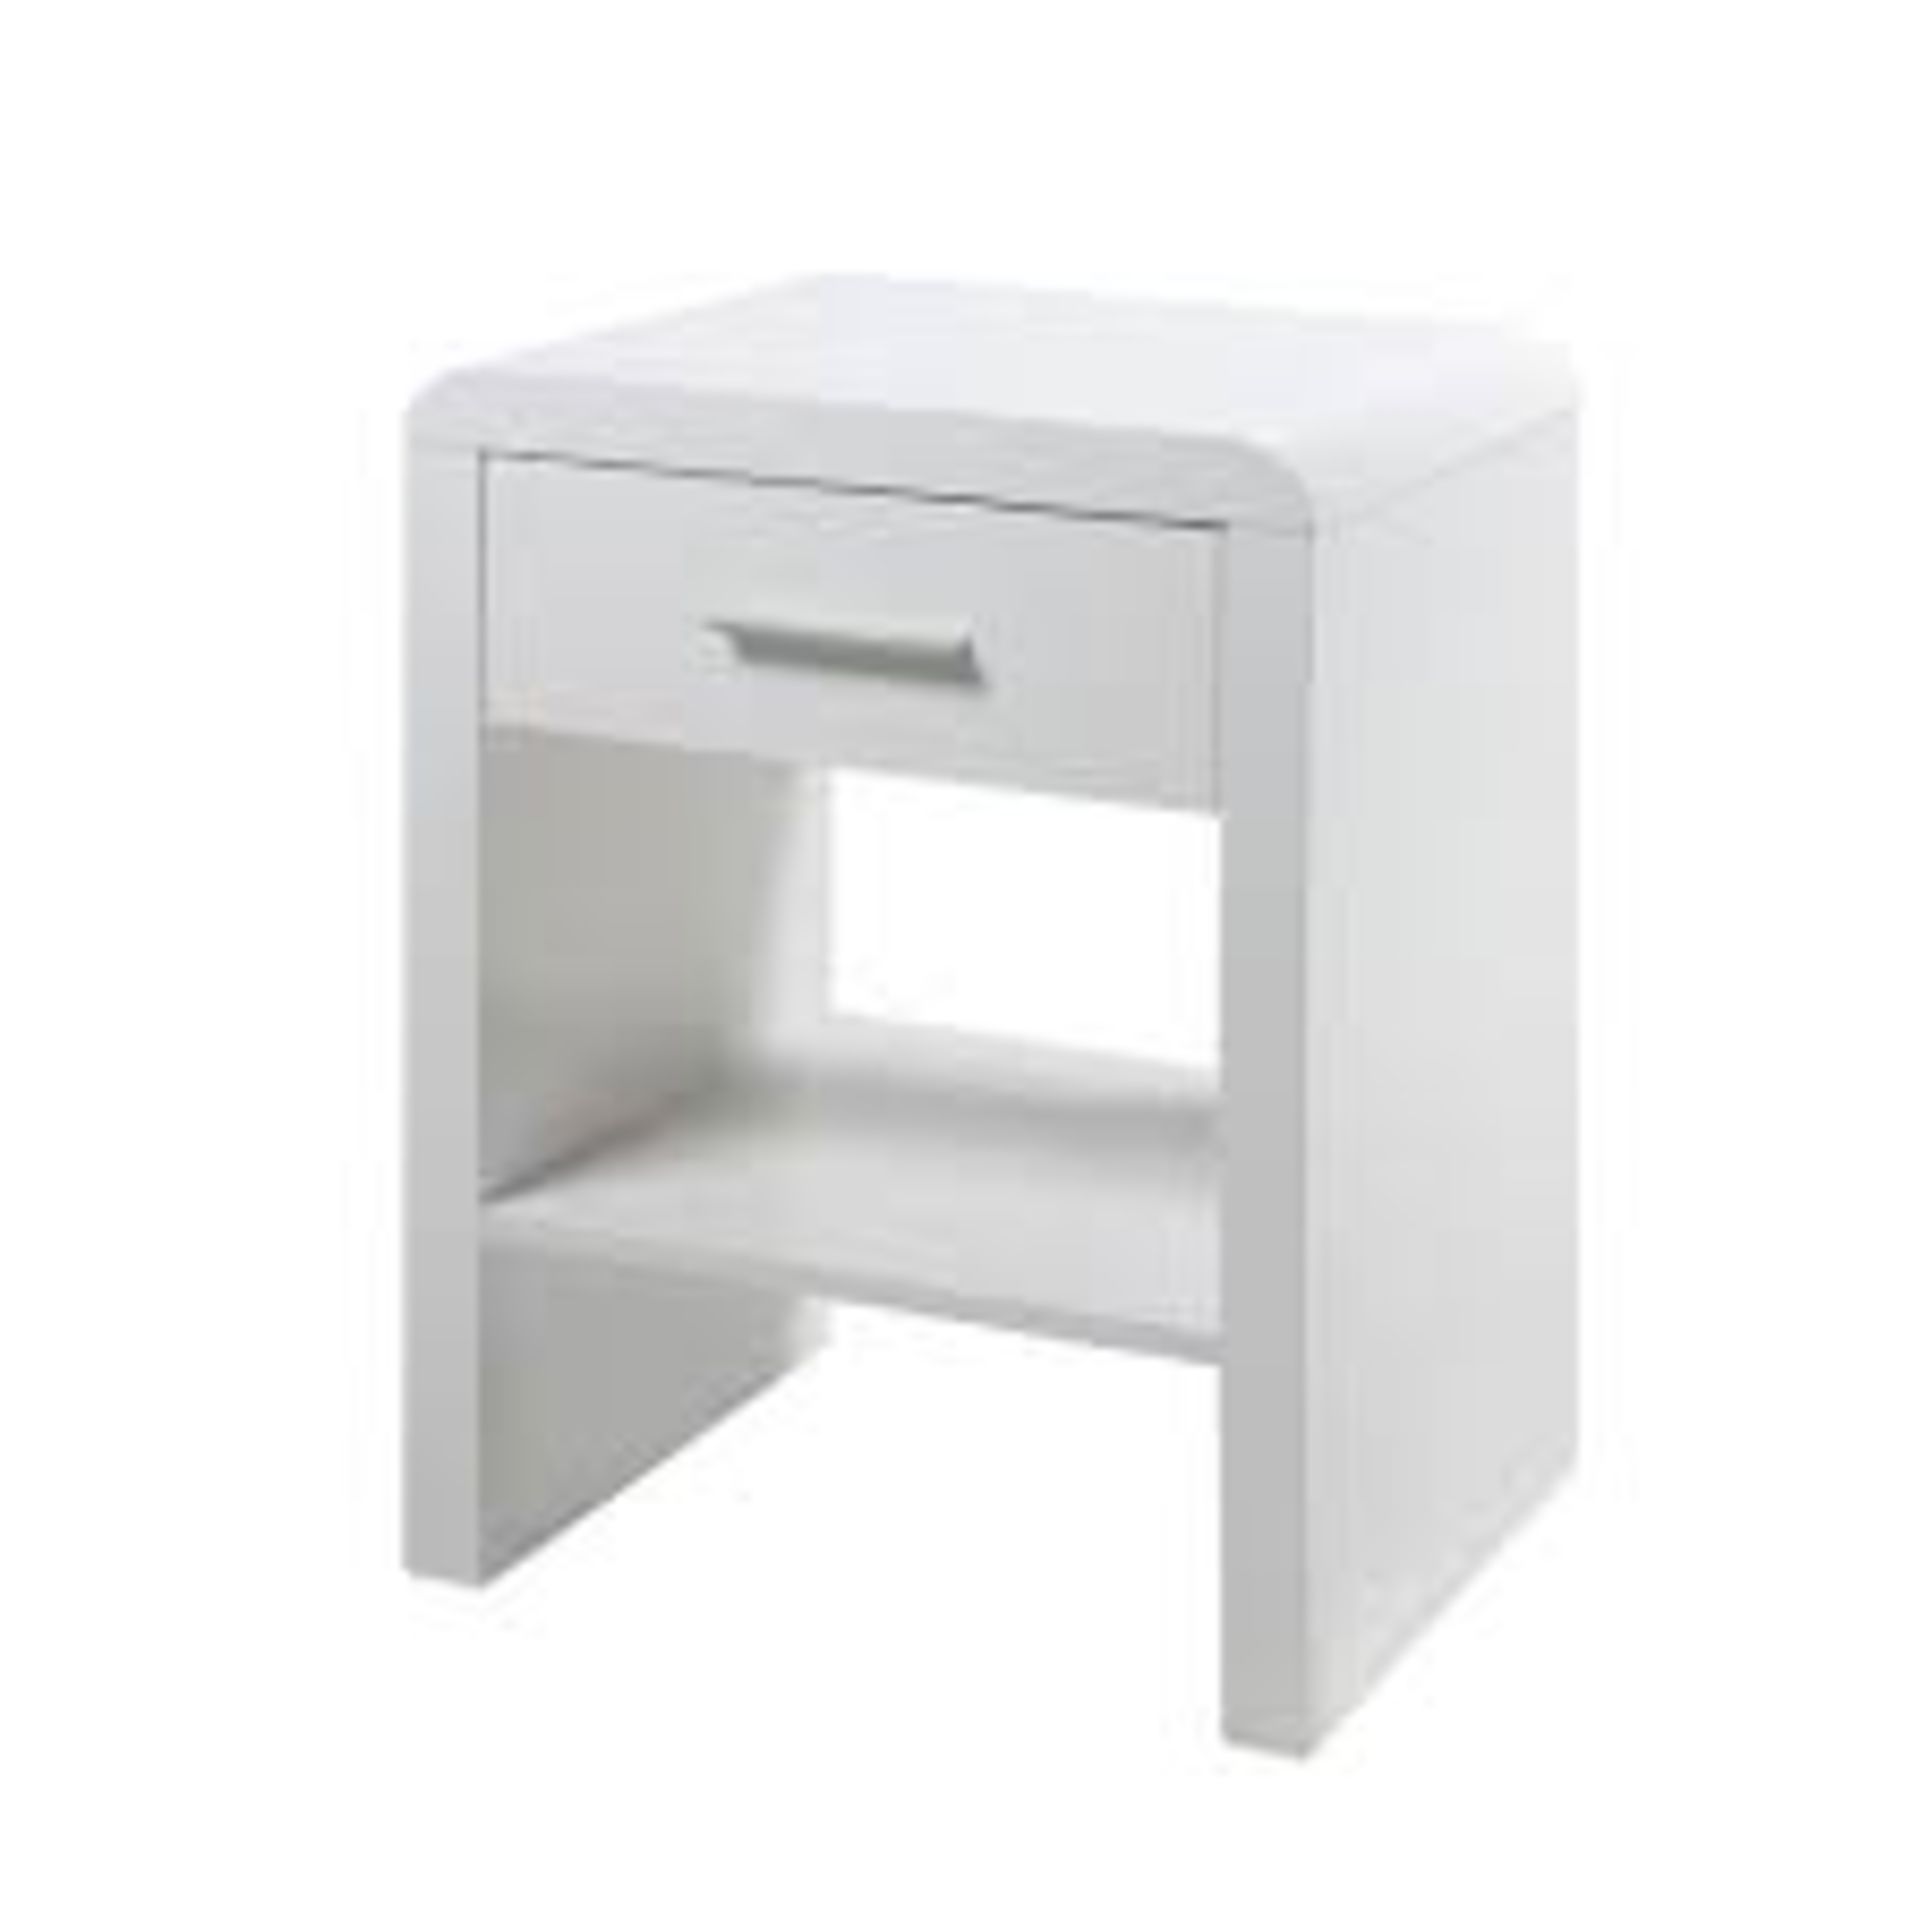 Boxed Supernova High Gloss White Single Draw Night Table RRP £140 (Public Viewing and Appraisals